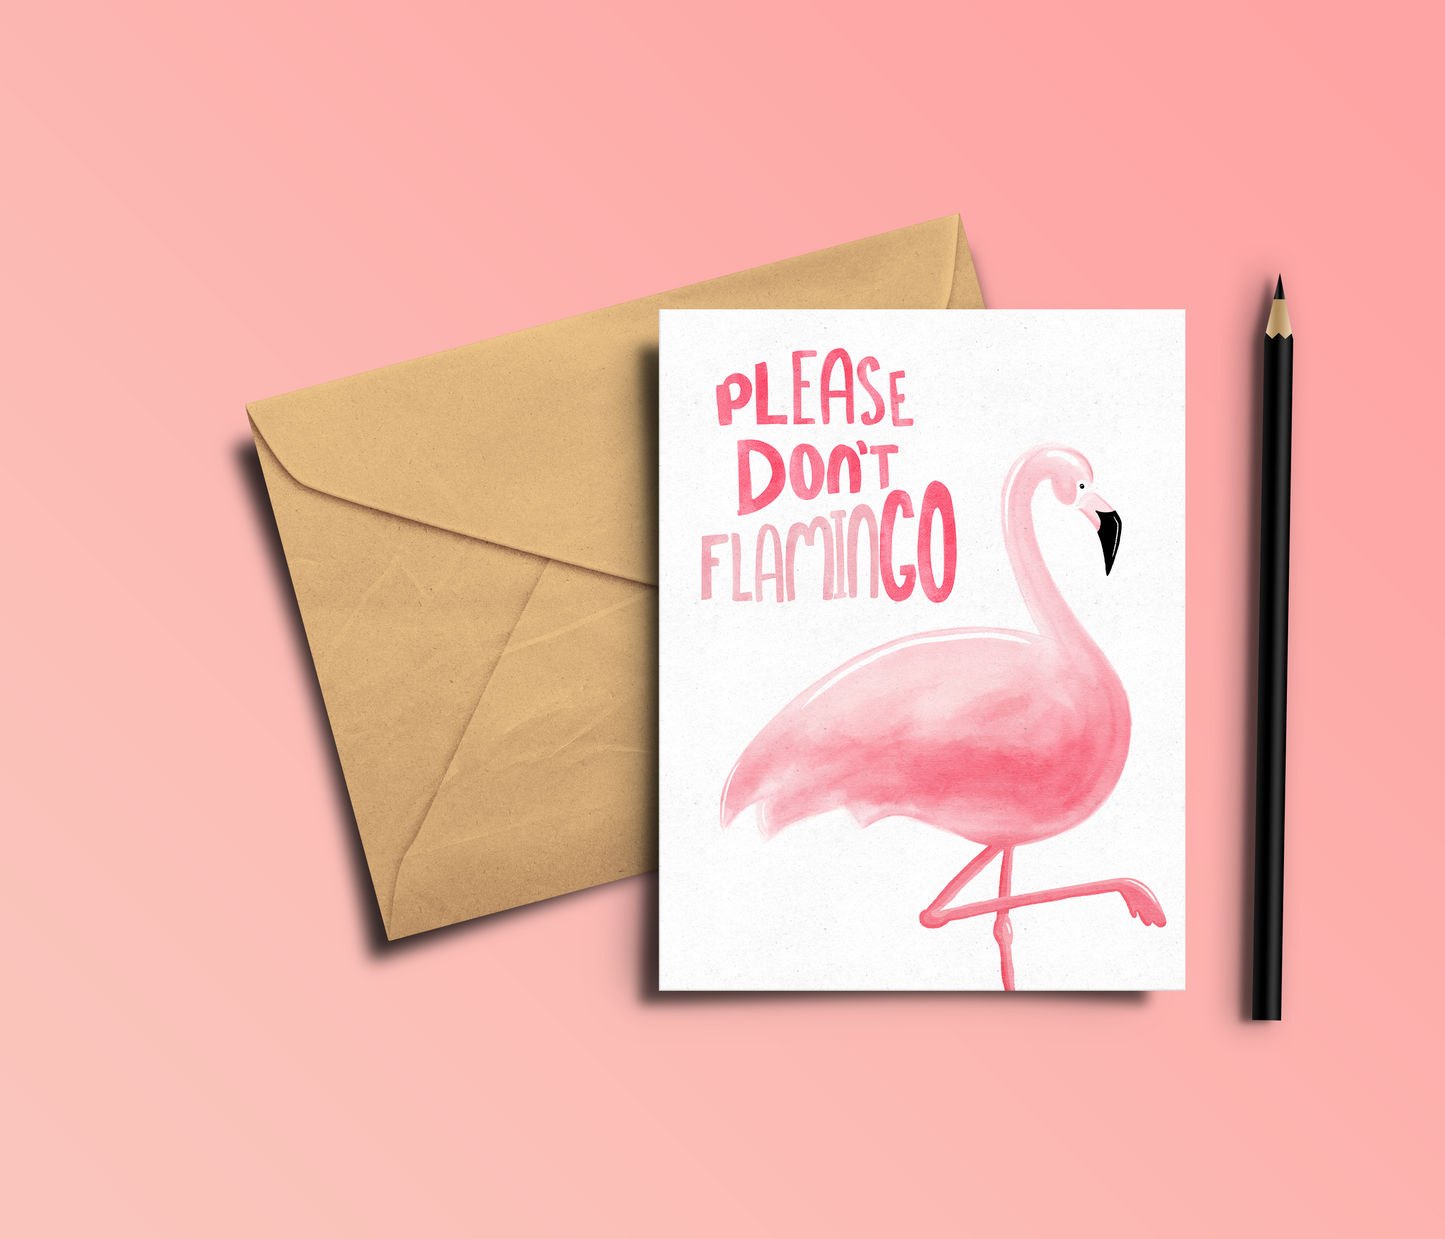 Flamingo Farewell Card, Funny Going Away Card gift Moving away card, Farewell Gift for Coworker - Friend, Goodbye Card For Coworkers Leaving